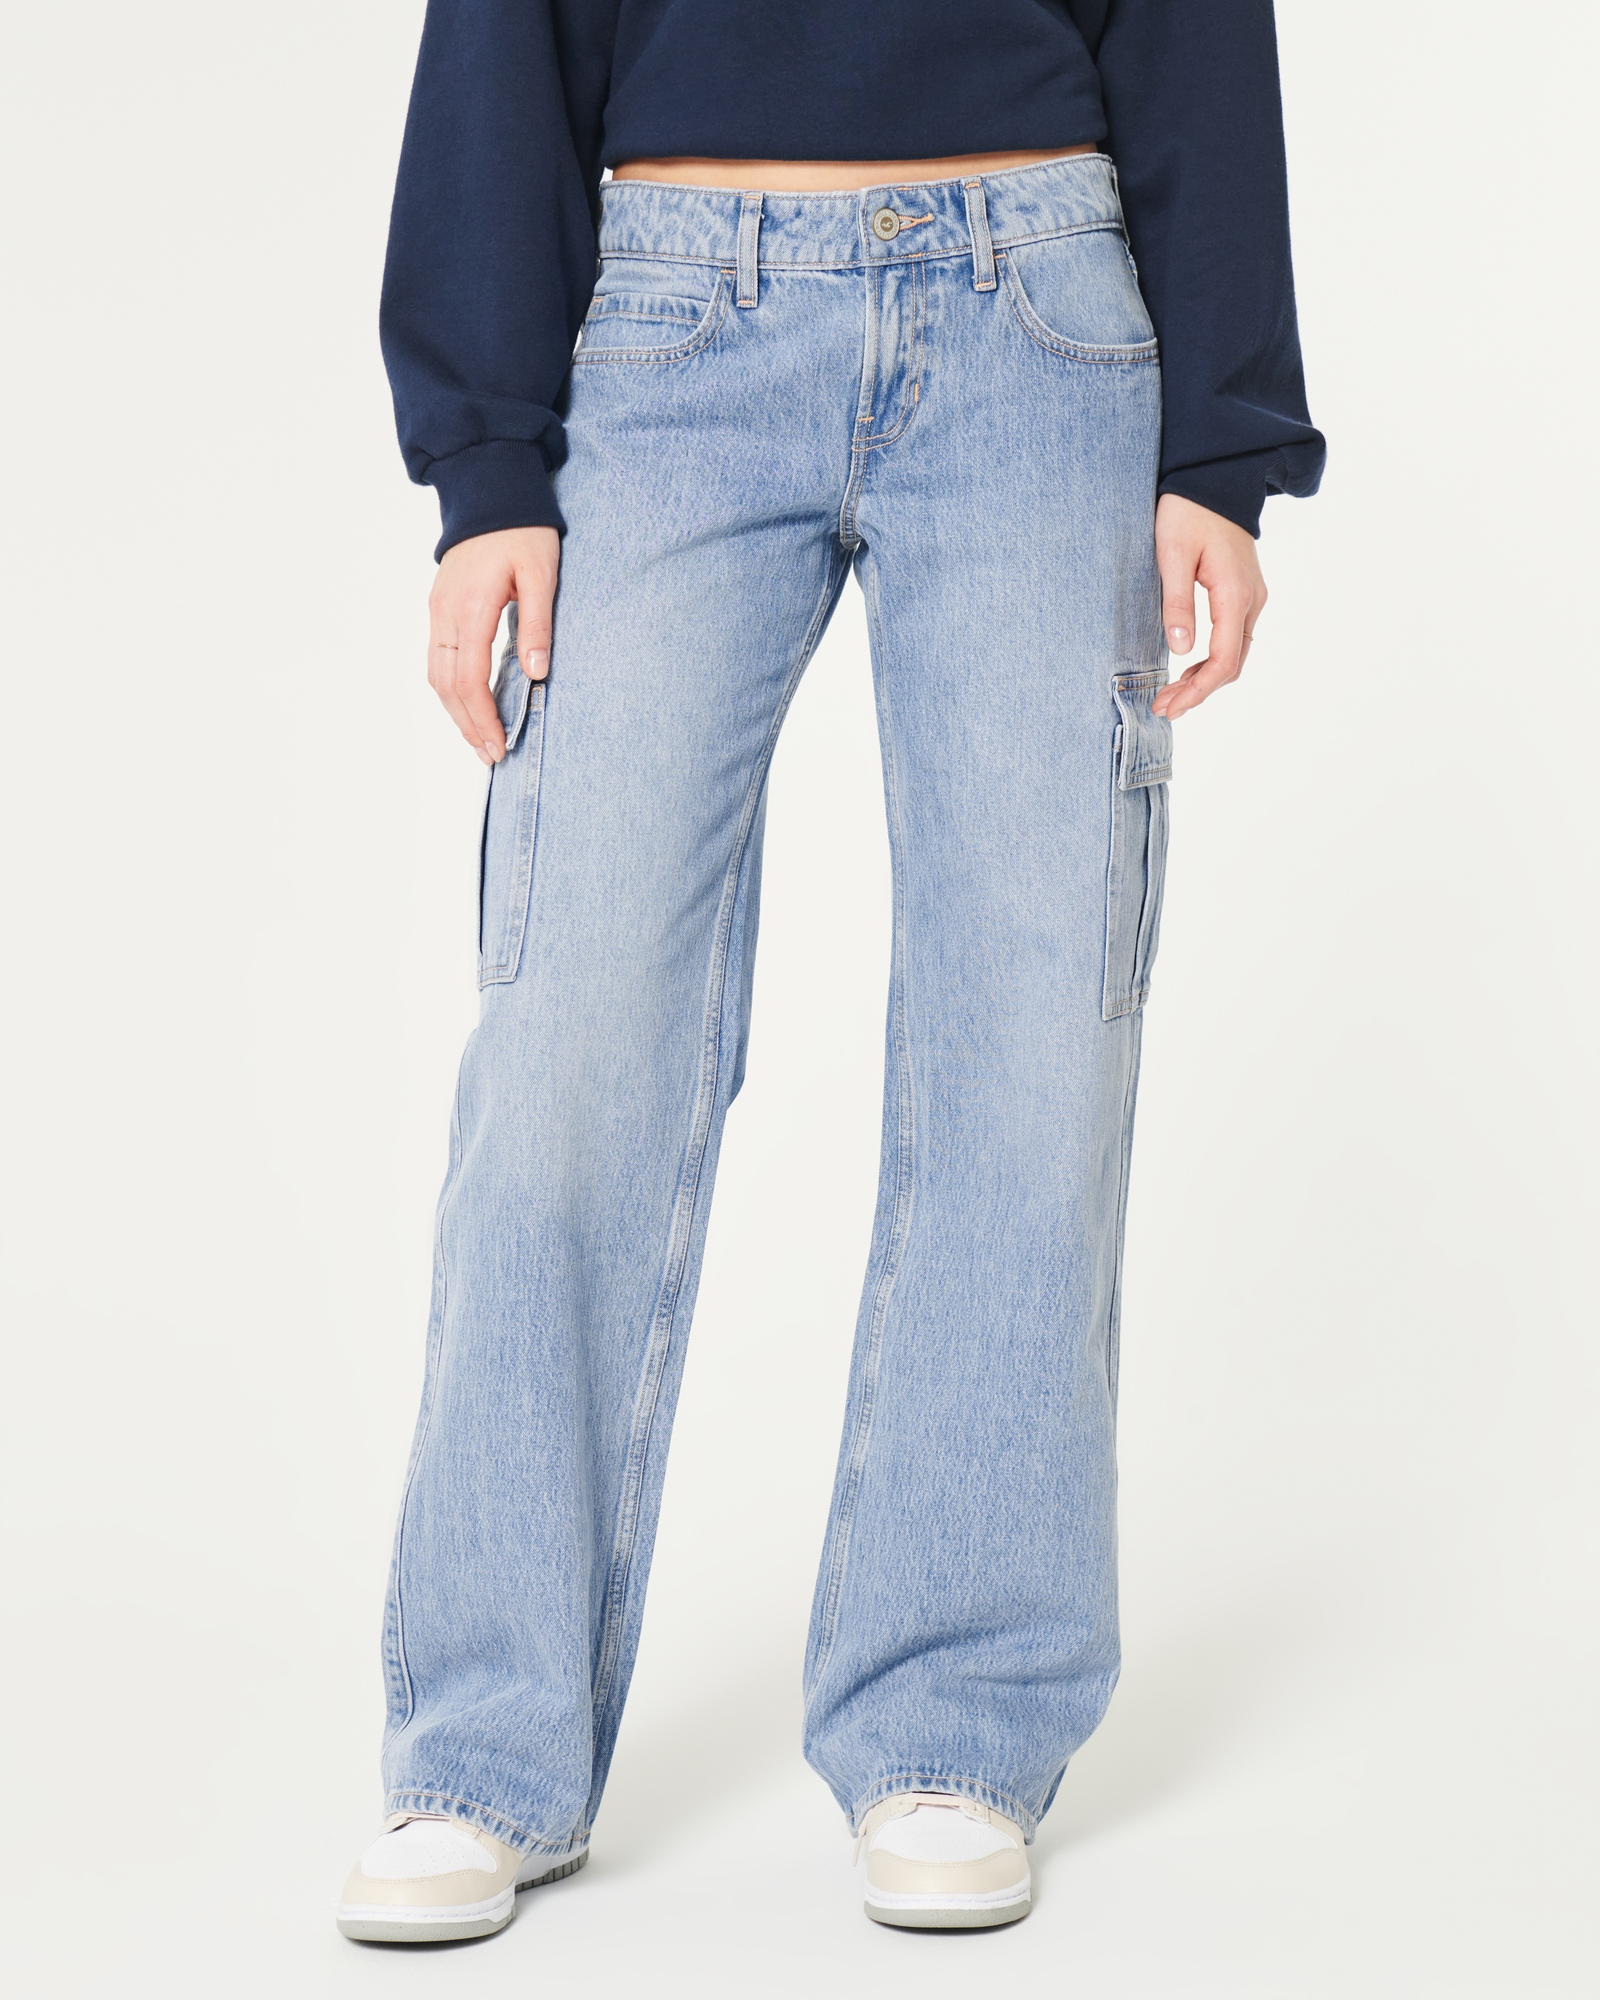 https://img.hollisterco.com/is/image/anf/KIC_355-4154-0107-278_model2.jpg?policy=product-extra-large